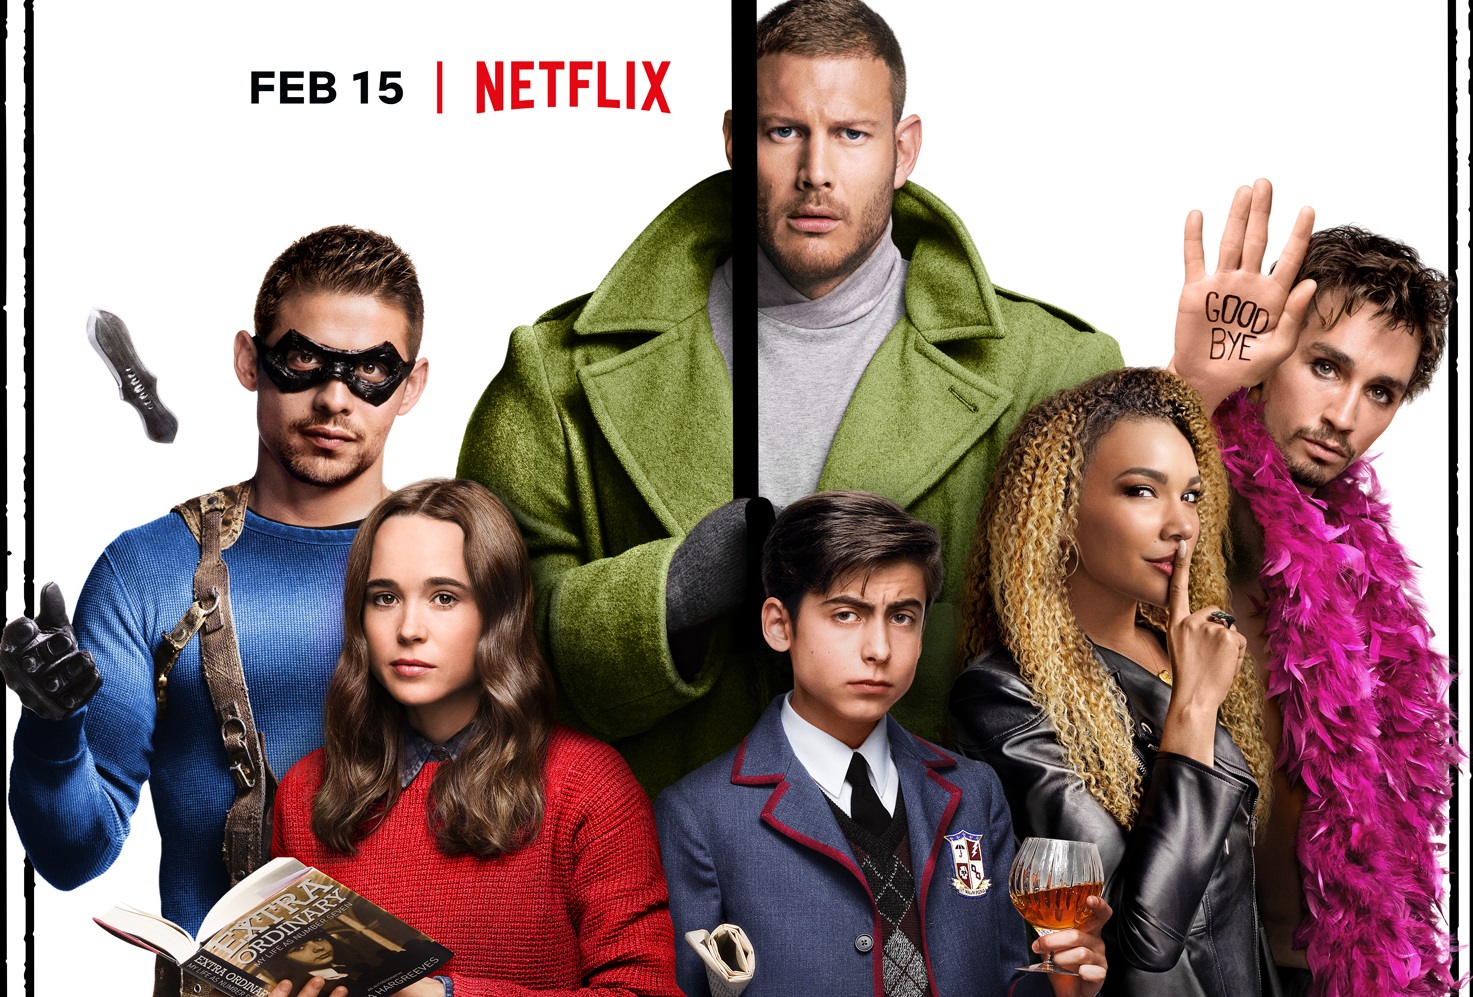 Netflix's The Umbrella Academy has been fully mapped out, reveals Gerard Way